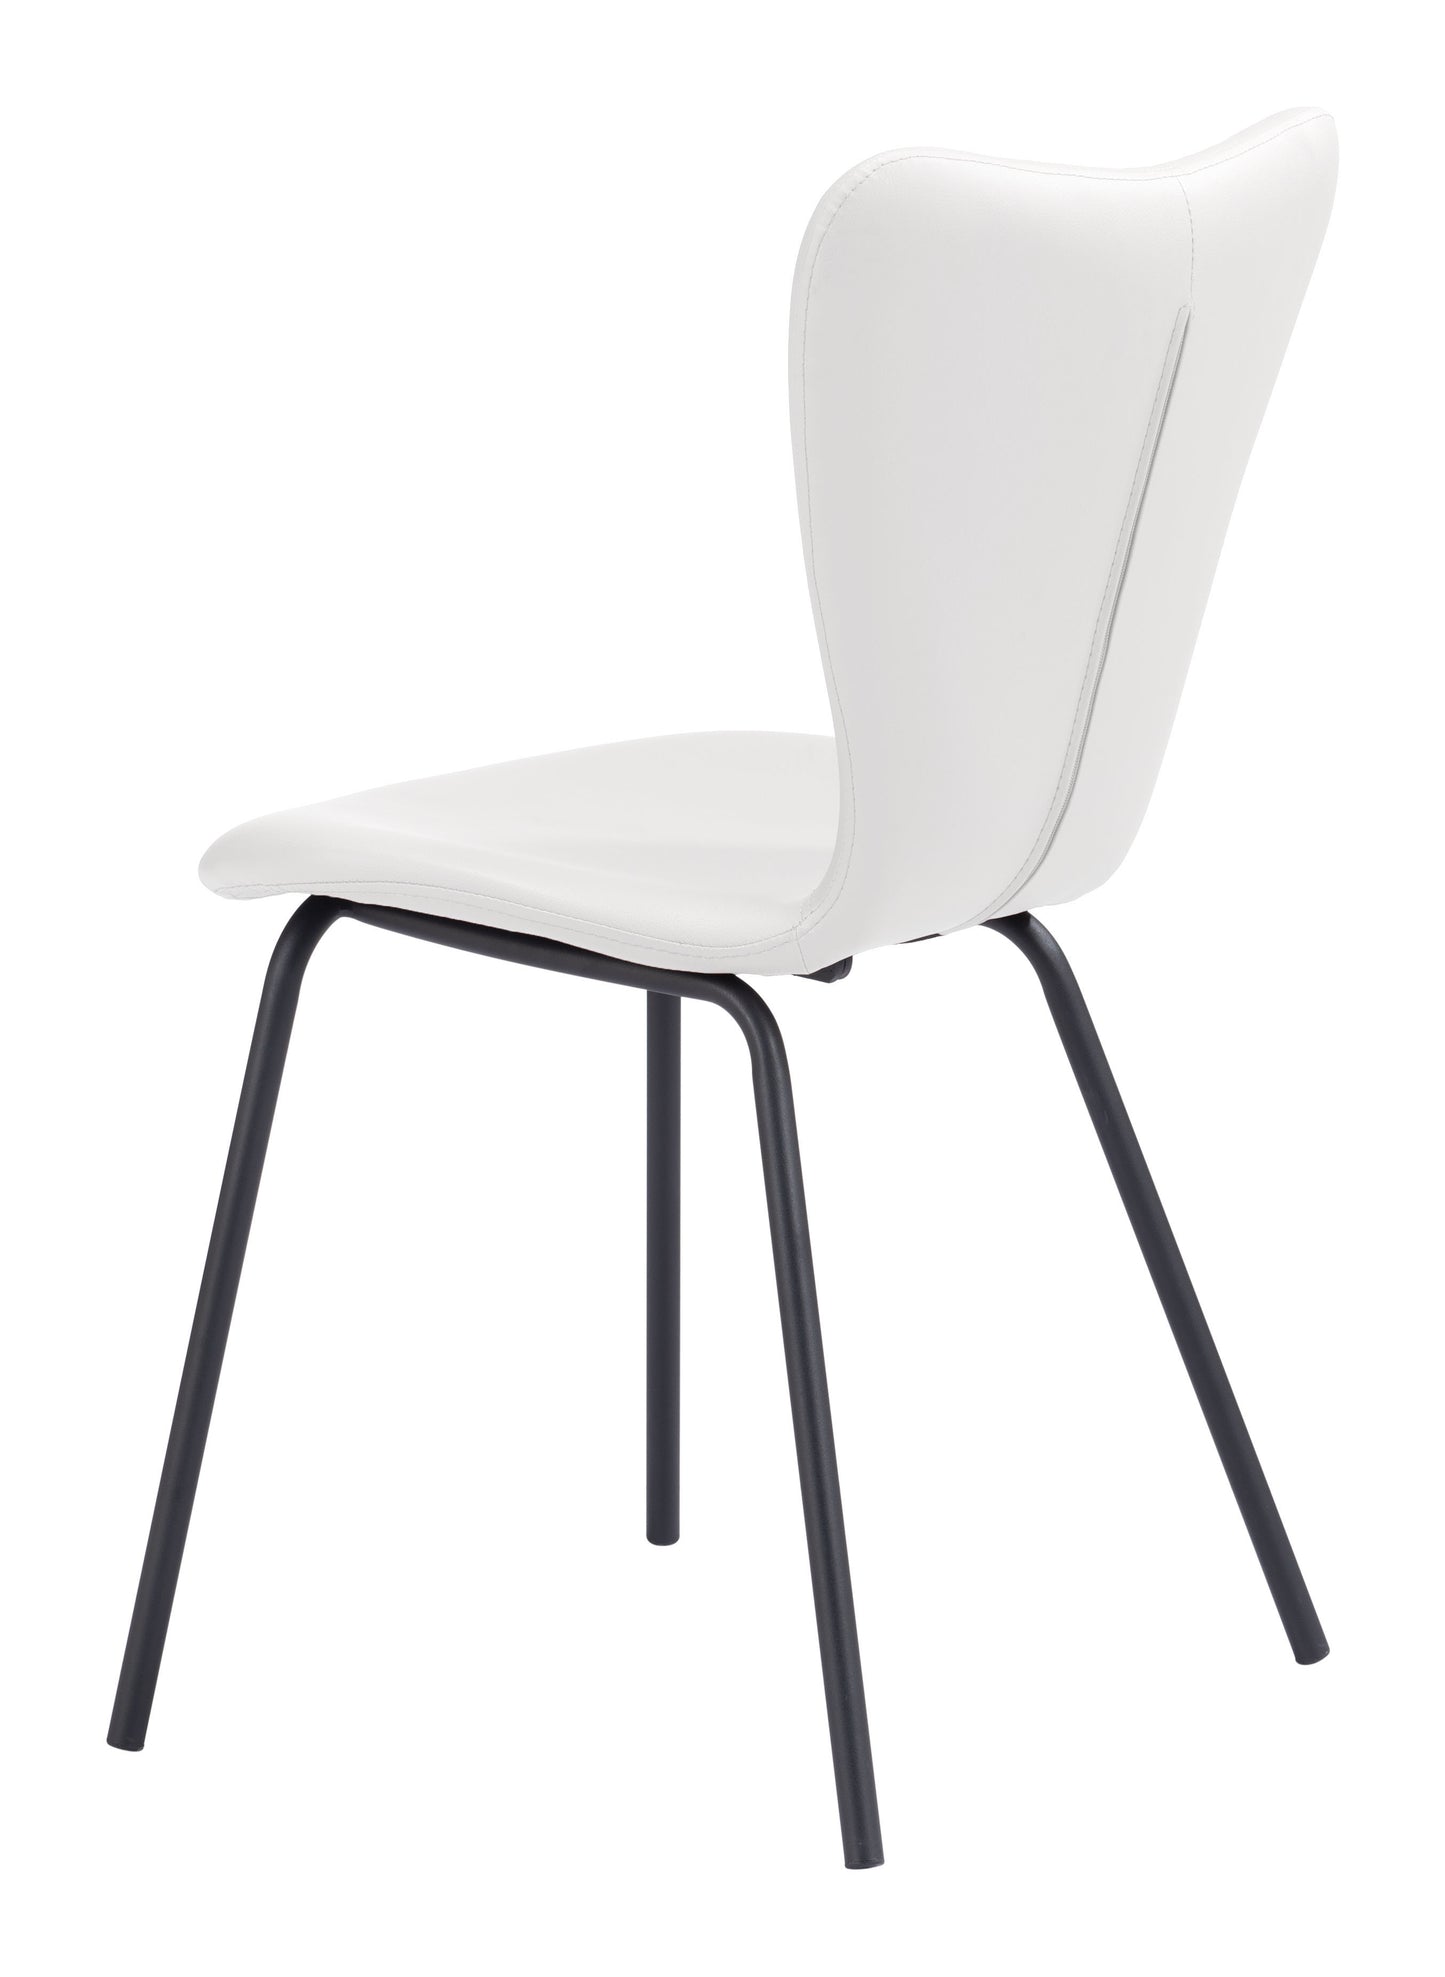 Torlo Dining Chair White (Set of 2)